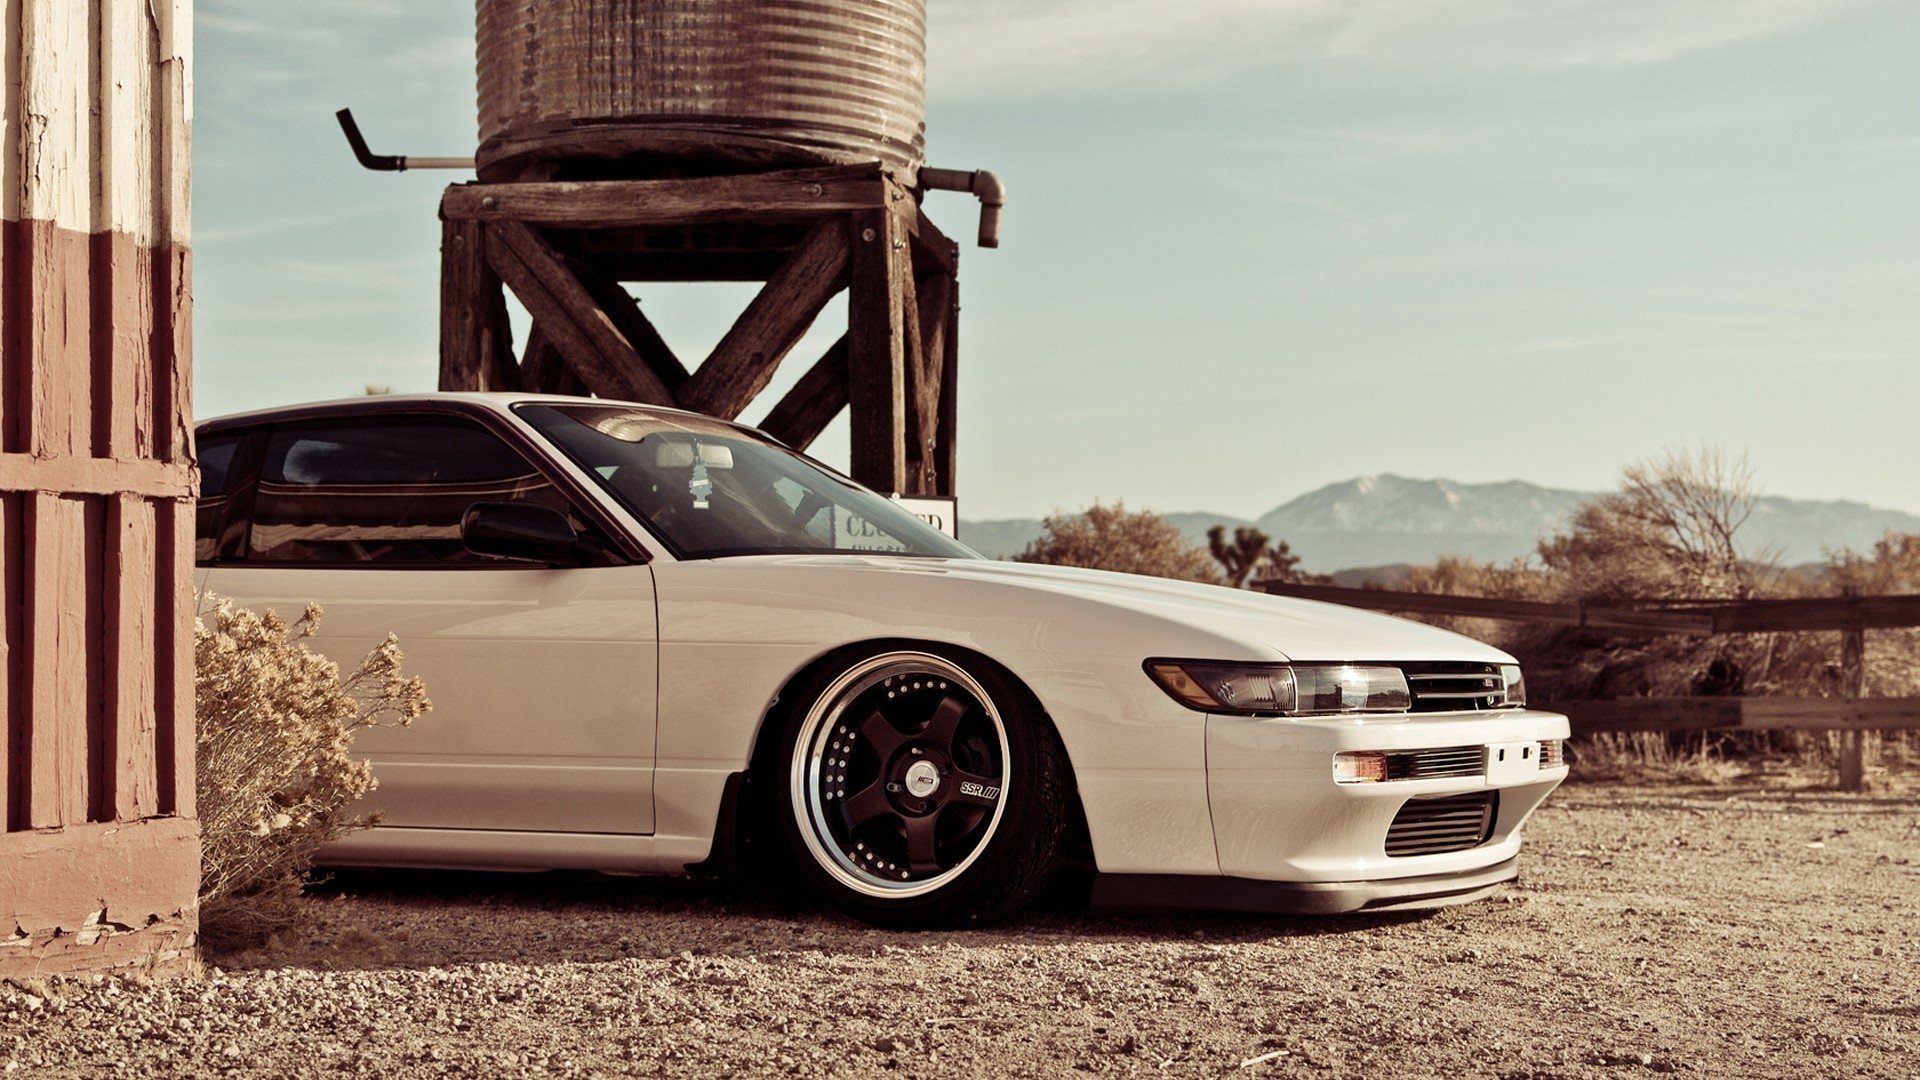 Nissan Silvia S13 HD Wallpapers and Backgrounds.